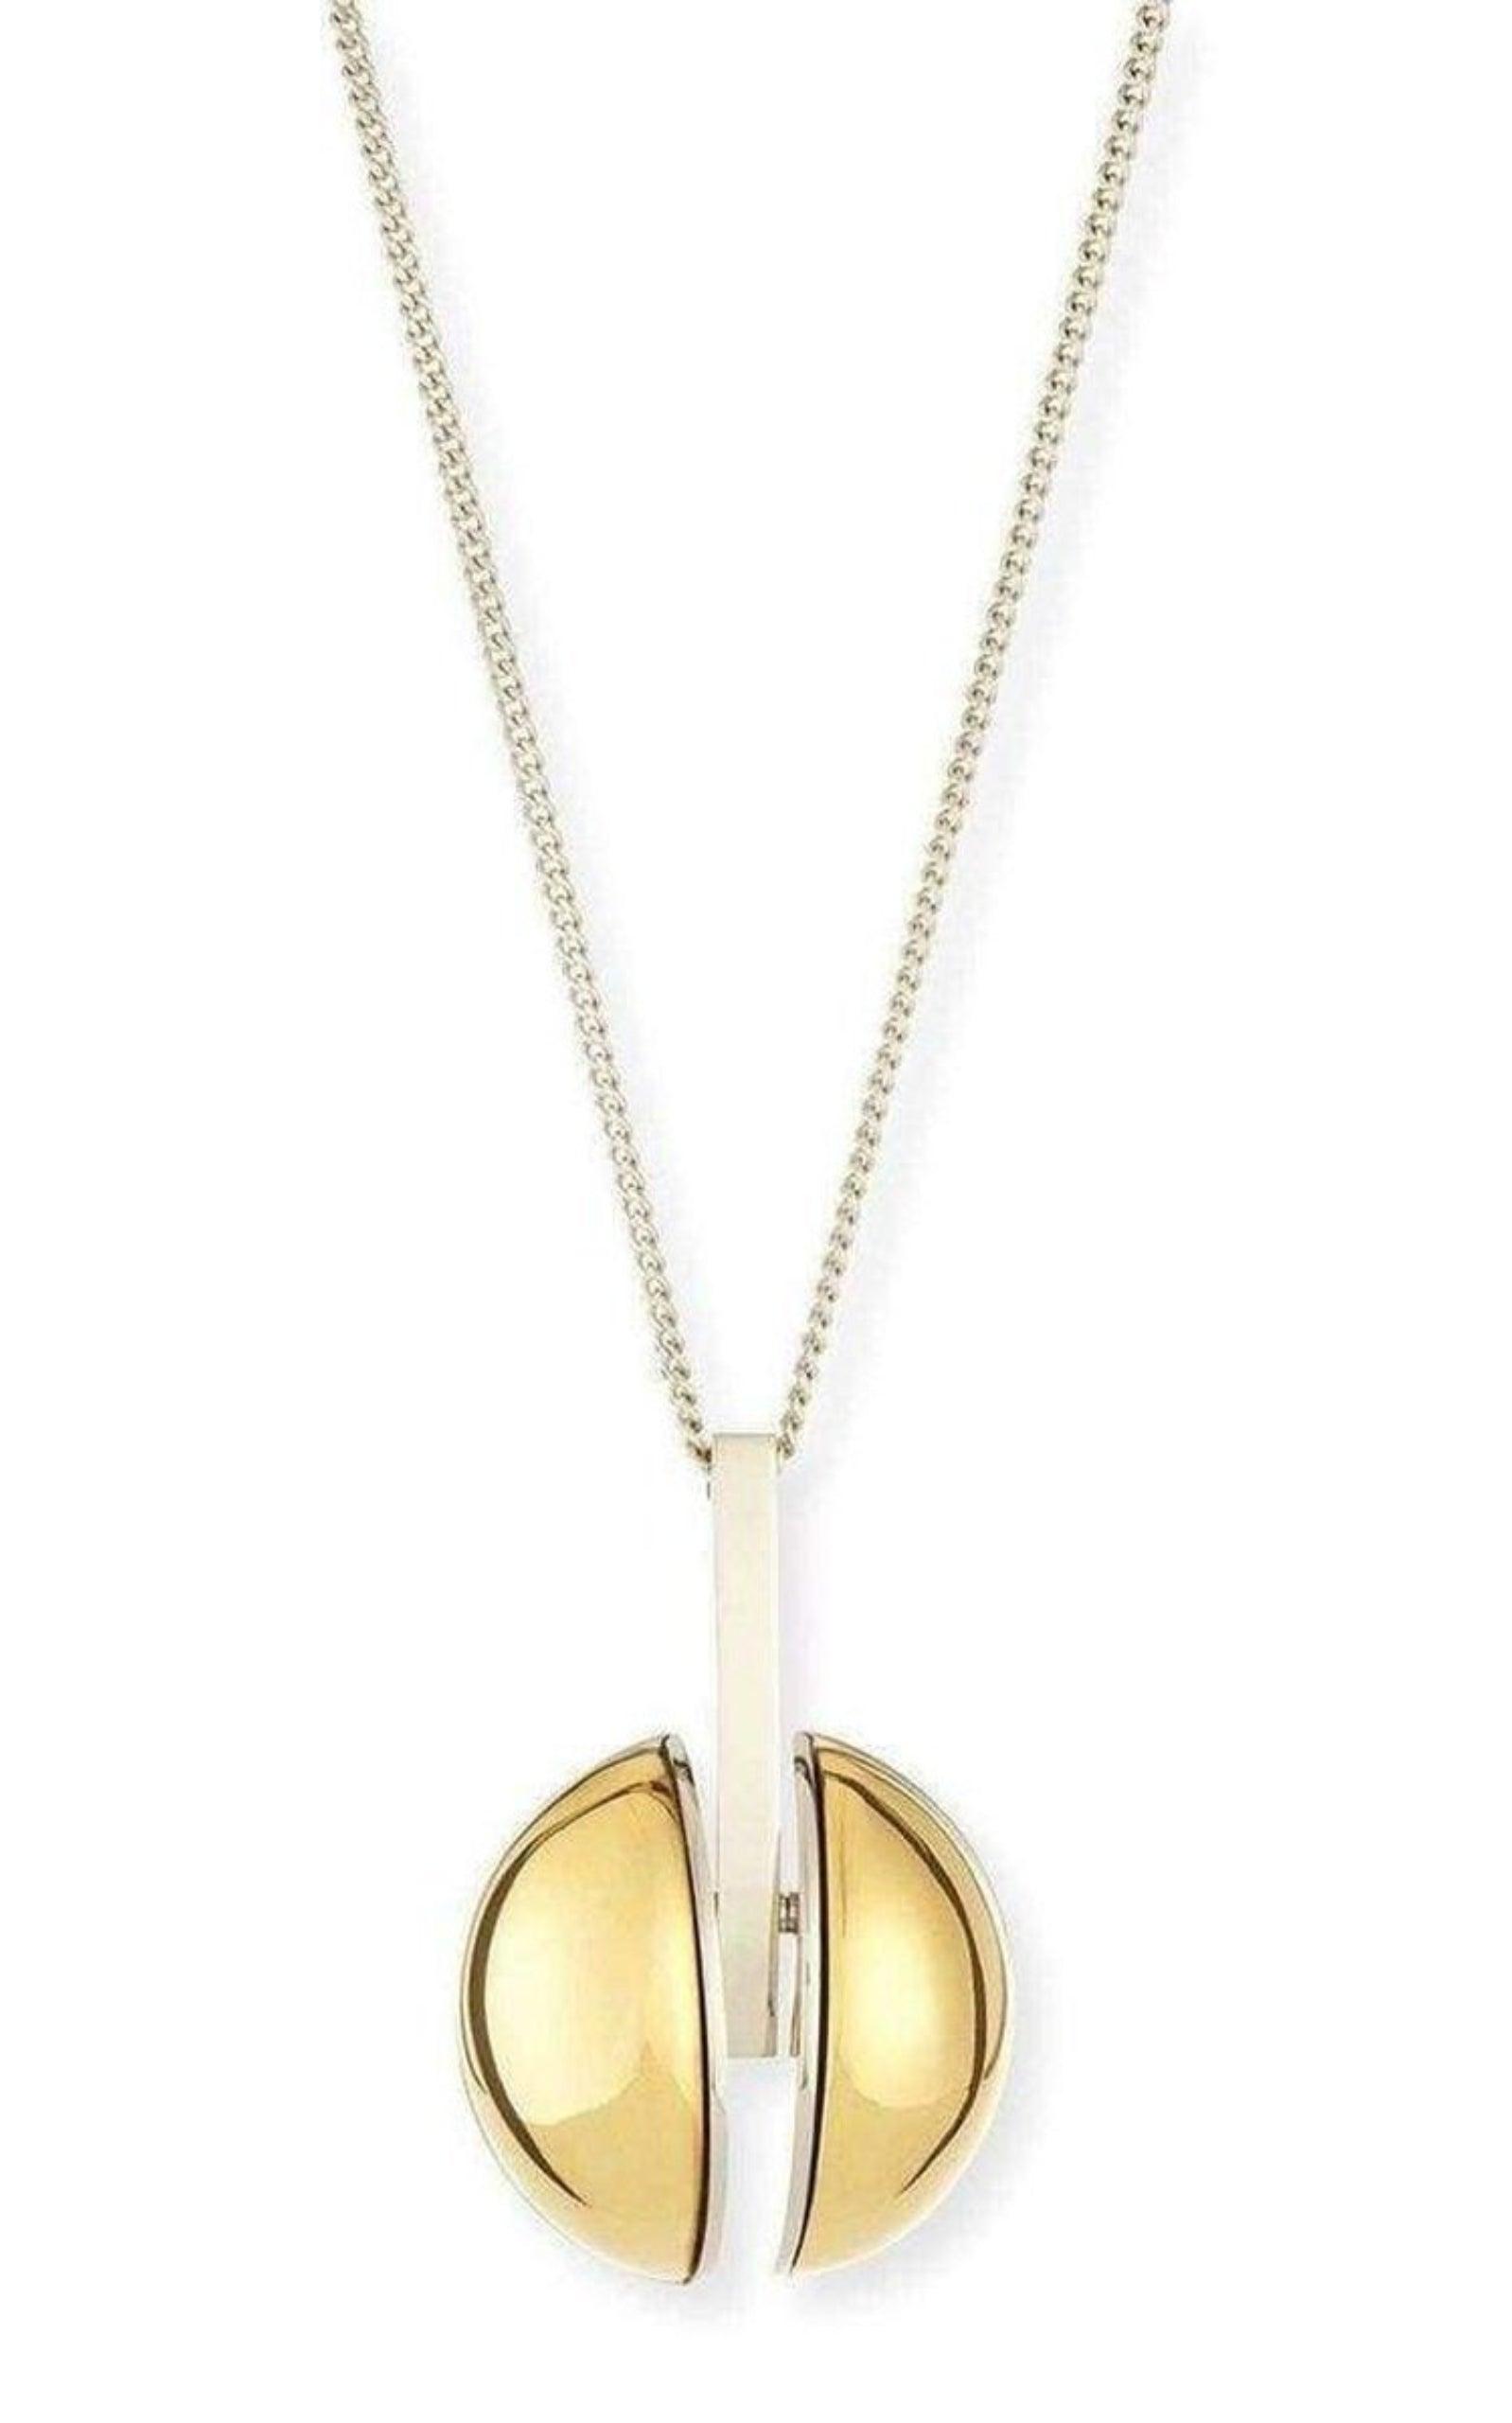  ChloeTwo Tone Golden Pendent Necklace - Runway Catalog